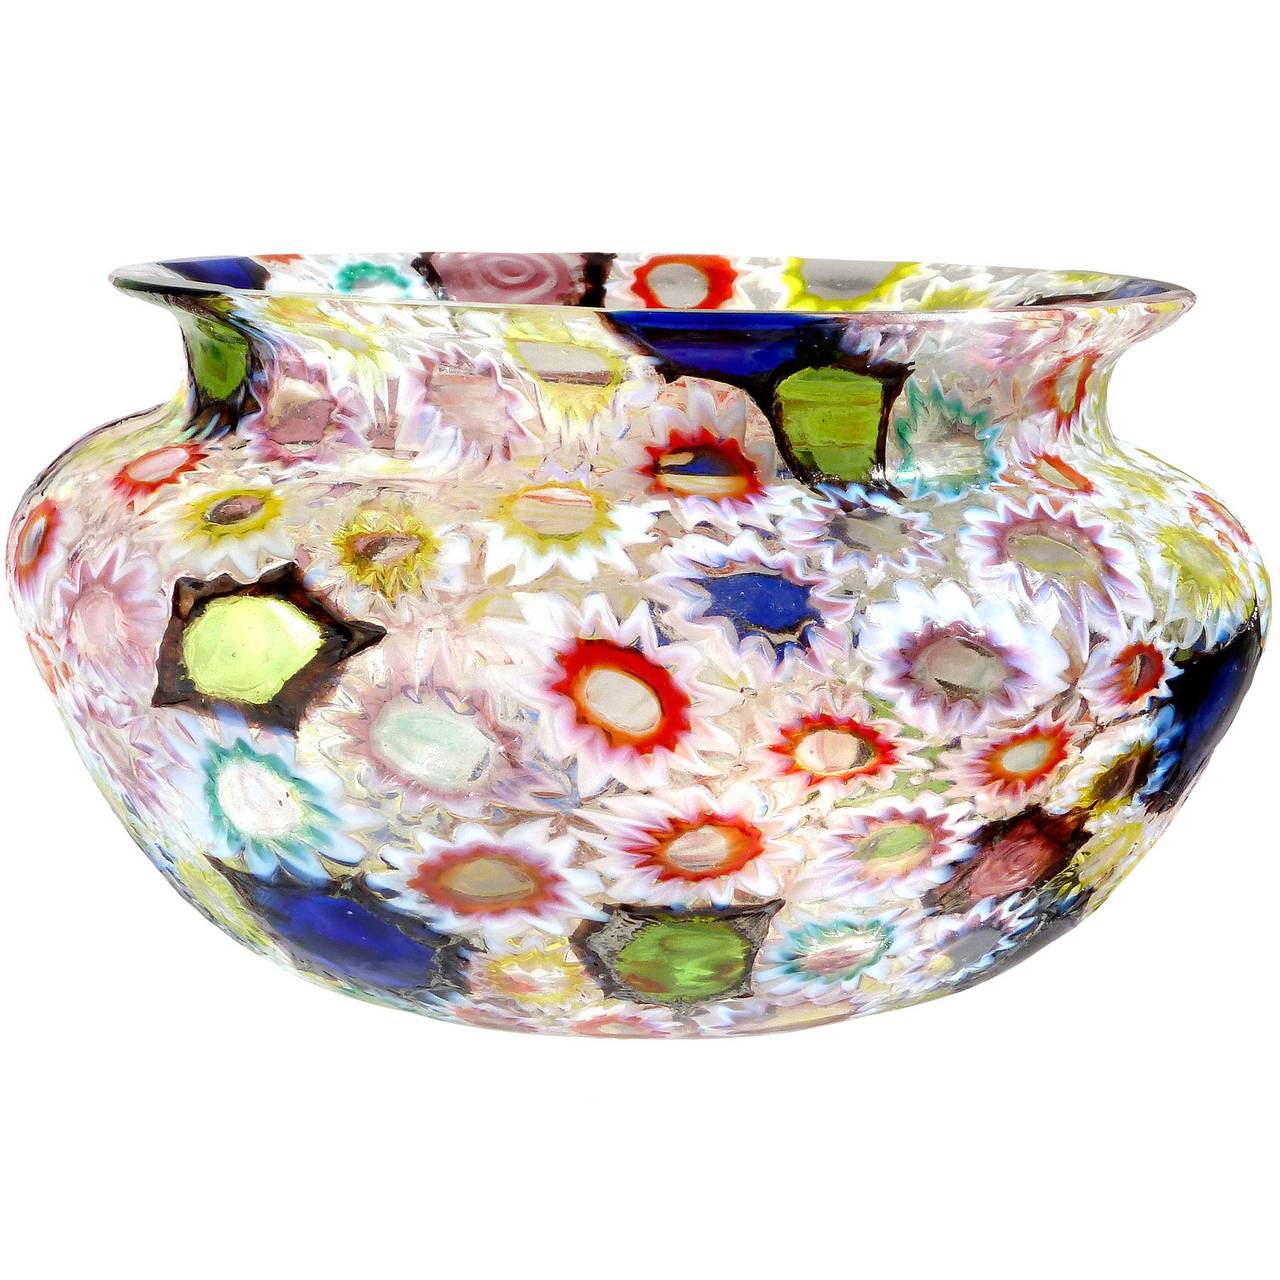 FREE Shipping Worldwide! See details below description.

Incredible Murano multicolor Millefiori flower and star mosaic art glass round bowl. Documented to the Fratelli Toso Company. Many of the murrines are lined in white, but some are lined in a